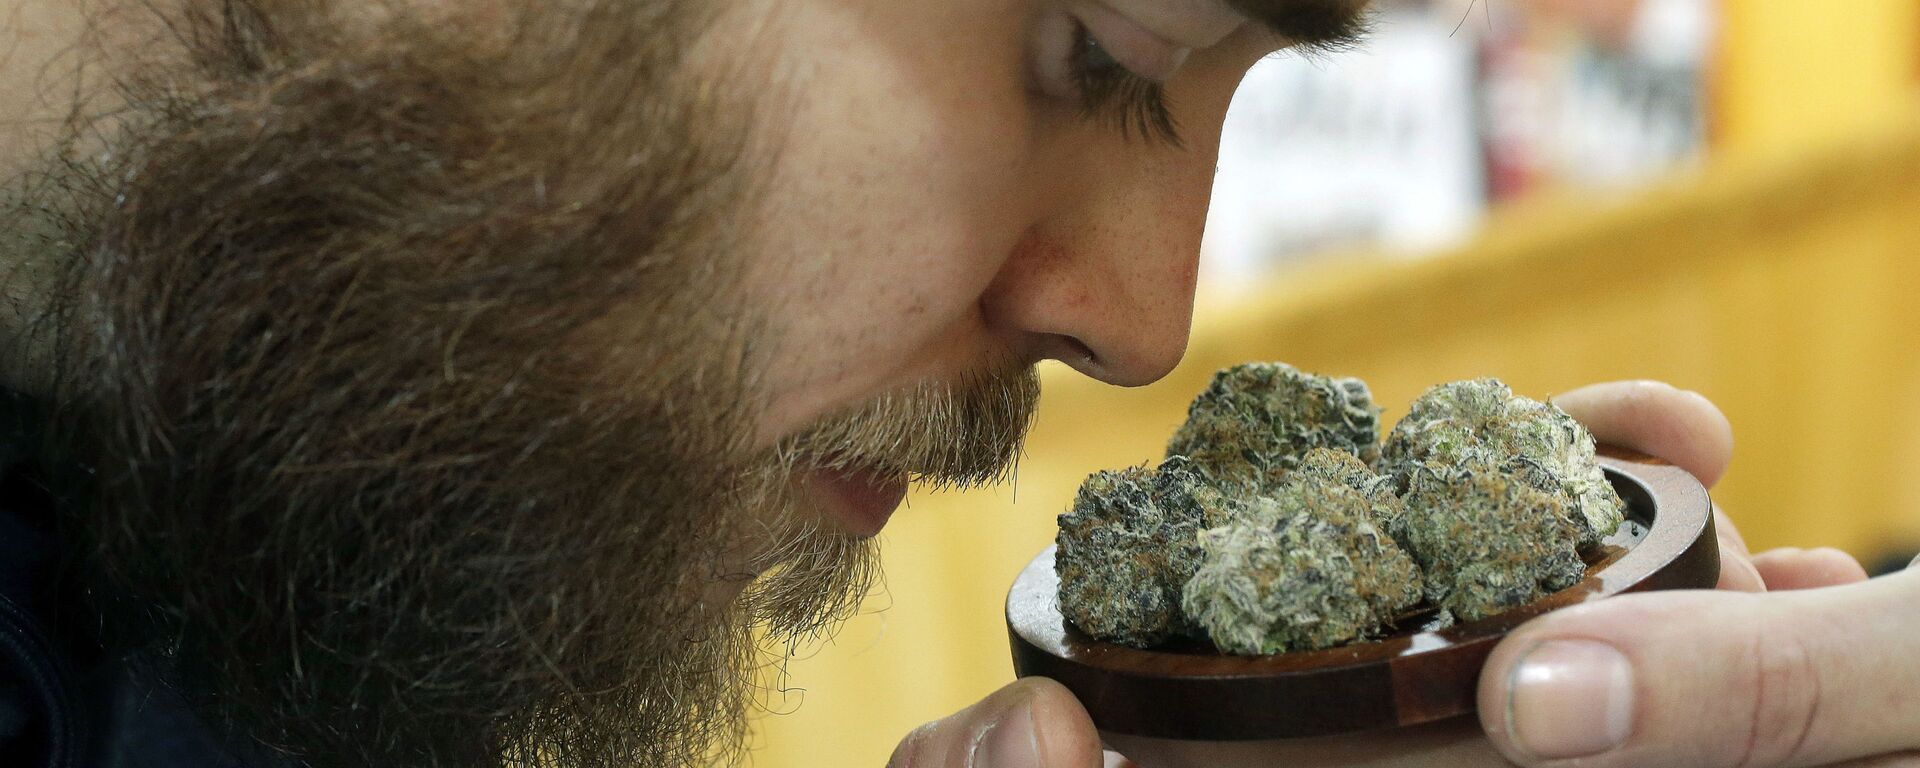 In this In this Dec. 17 2017 file photo, Julian Clark, of Westerly, R.I., smells a strain of marijuana flowers called Cookie Pebbles, at a trade show in Worcester, Mass. Three New England states legalized recreational marijuana, but there is still no place to buy pot legally in the region. Sunday, July 1, 2018, had been the target date to open pot shops in Massachusetts, but no retail licenses have yet been awarded. Possession of small amounts of recreational marijuana becomes legal in Vermont that day, but the law has no provisions for retail sales. Pot shops aren't expected in Maine until 2019 at earliest. - Sputnik International, 1920, 23.08.2022